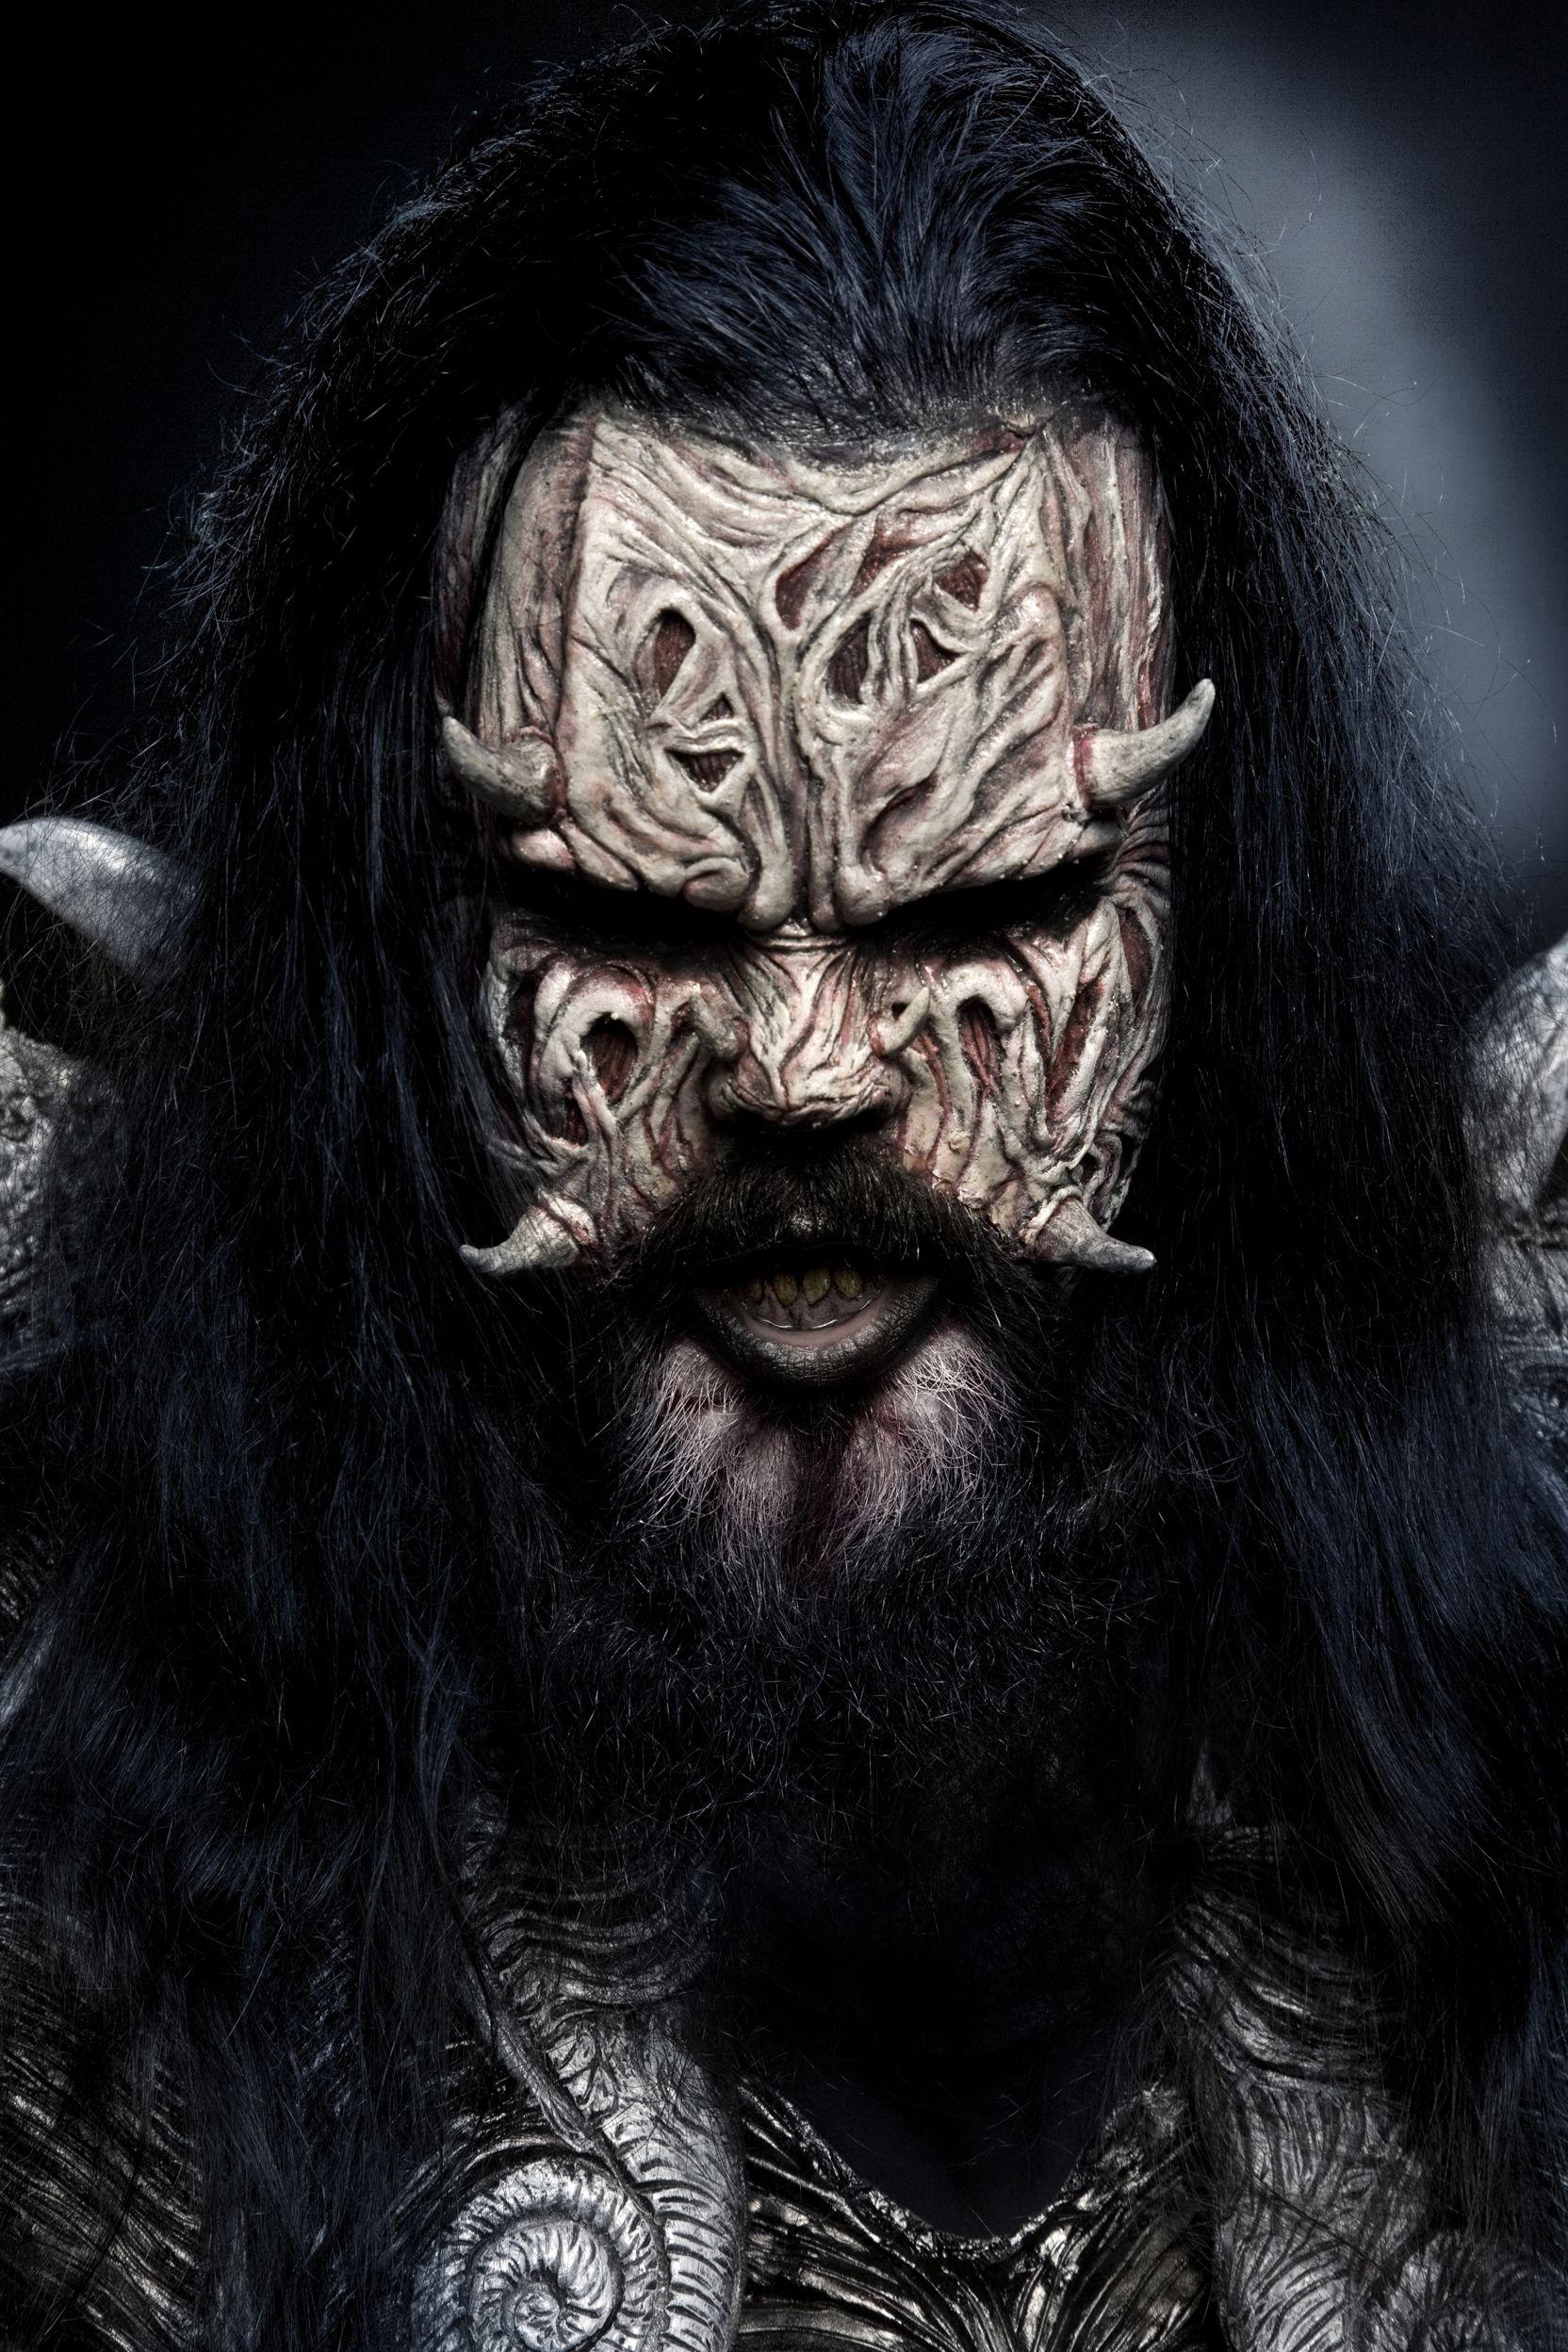 Mr Lordi. Music. Band picture, Lordi band, Metal bands